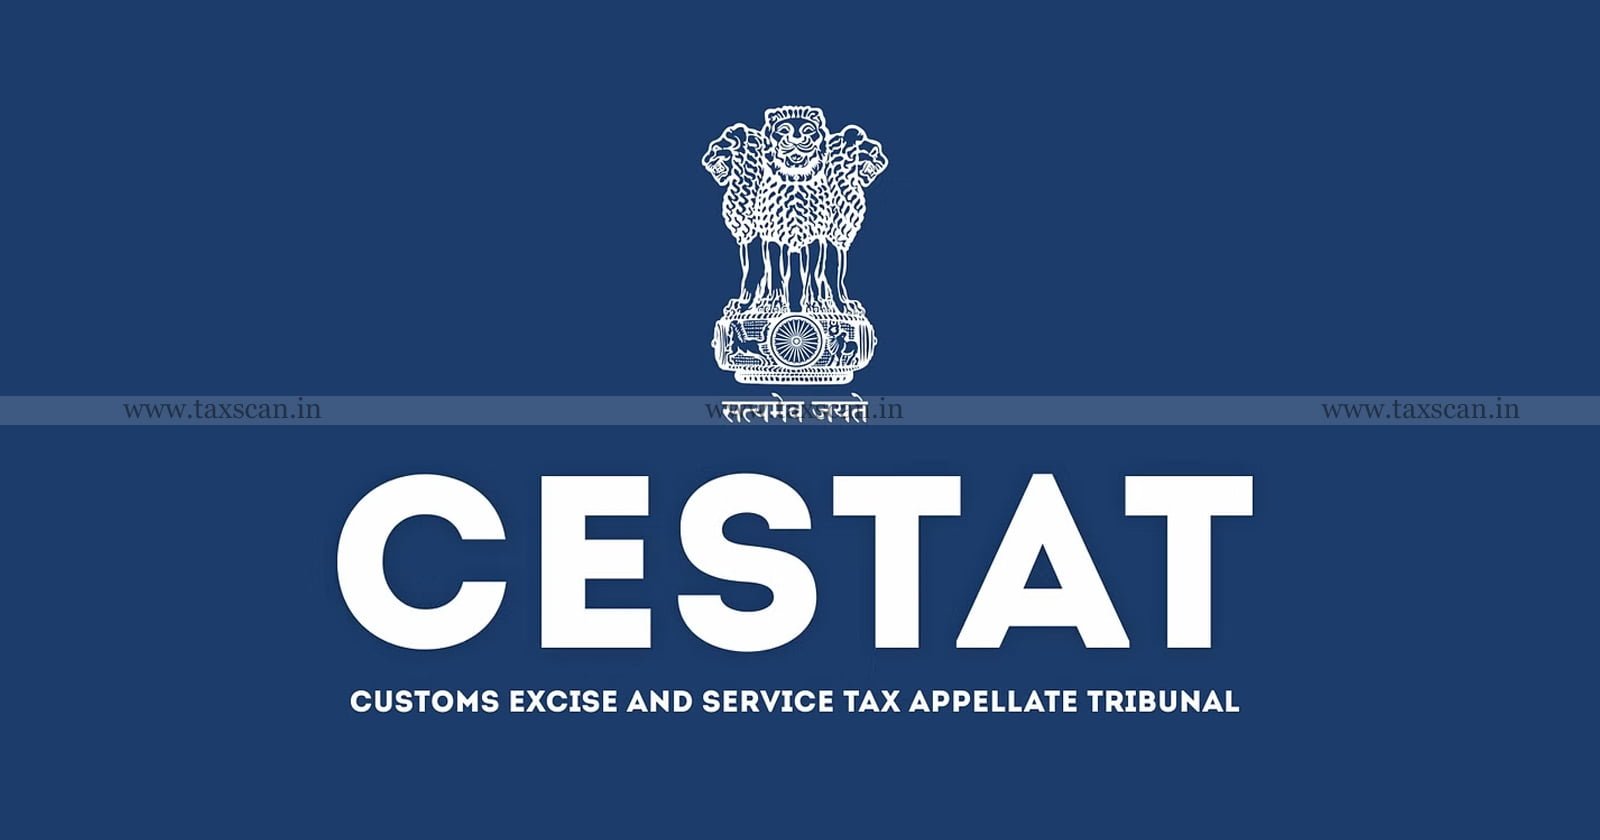 Necessary Documents - Cross Examine Government - valuer on SHIS - CESTAT - Commissioner - taxscan